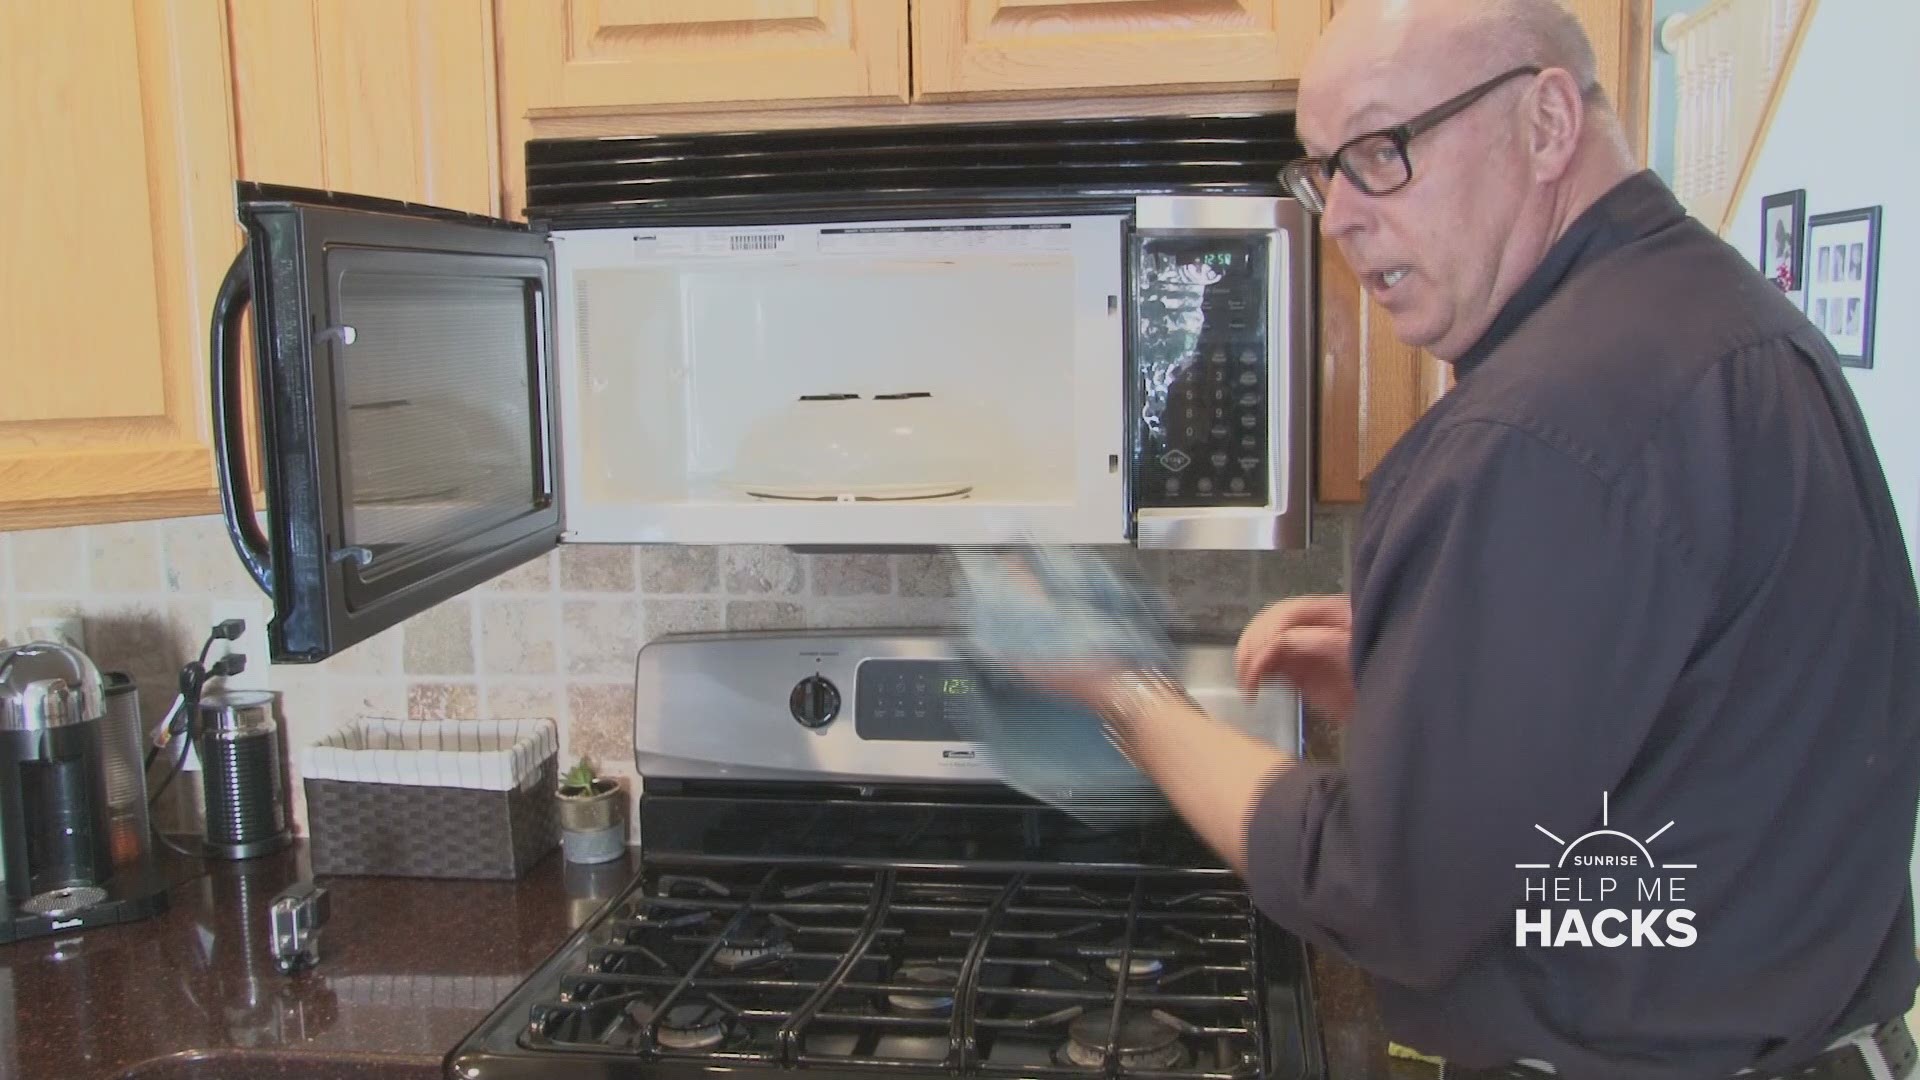 Clean out your microwave and make your rugs look new with these spring cleaning hacks. http://kare11.tv/2DENo9q